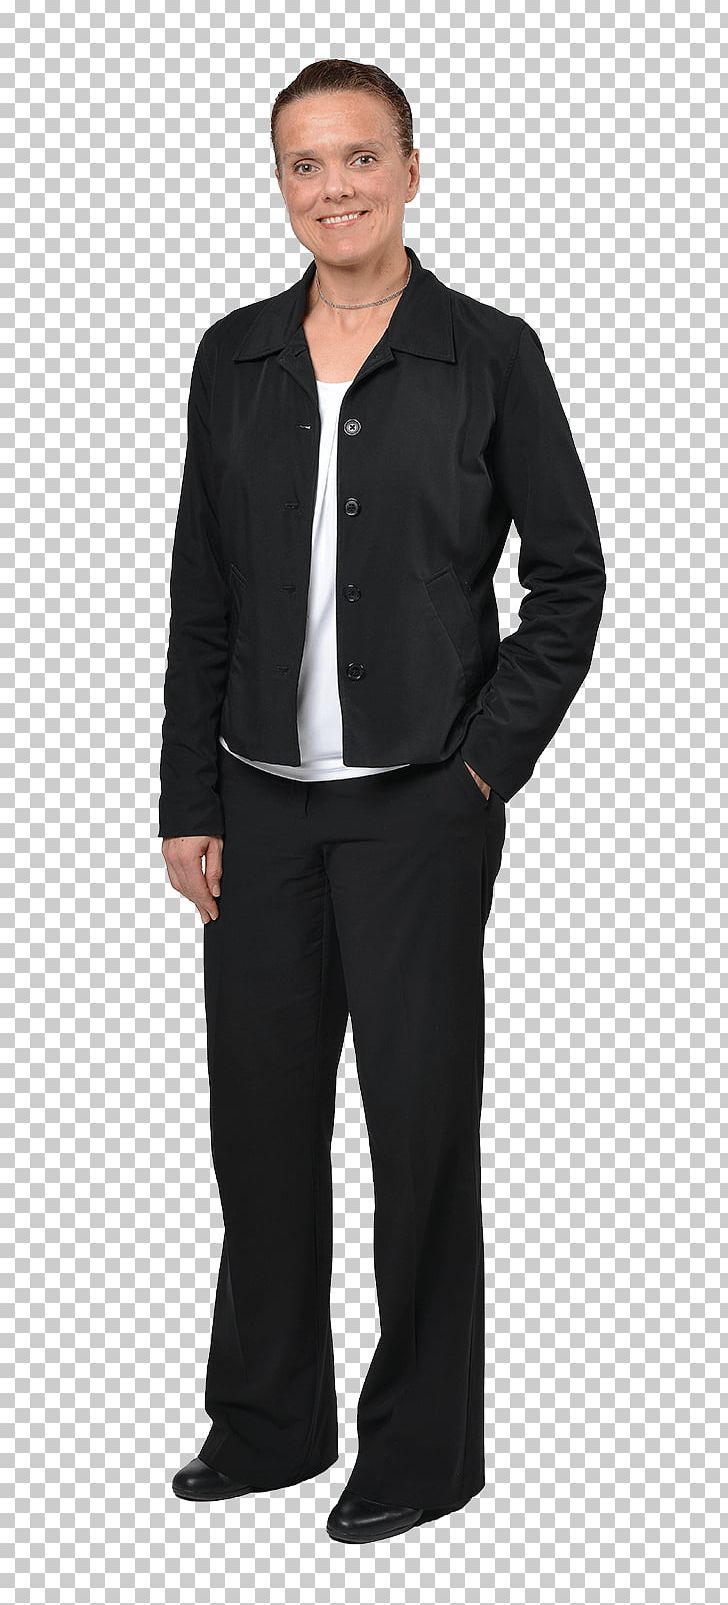 Blazer Tuxedo Double-breasted Suit Single-breasted PNG, Clipart, Black, Blazer, Business, Business Executive, Businessperson Free PNG Download